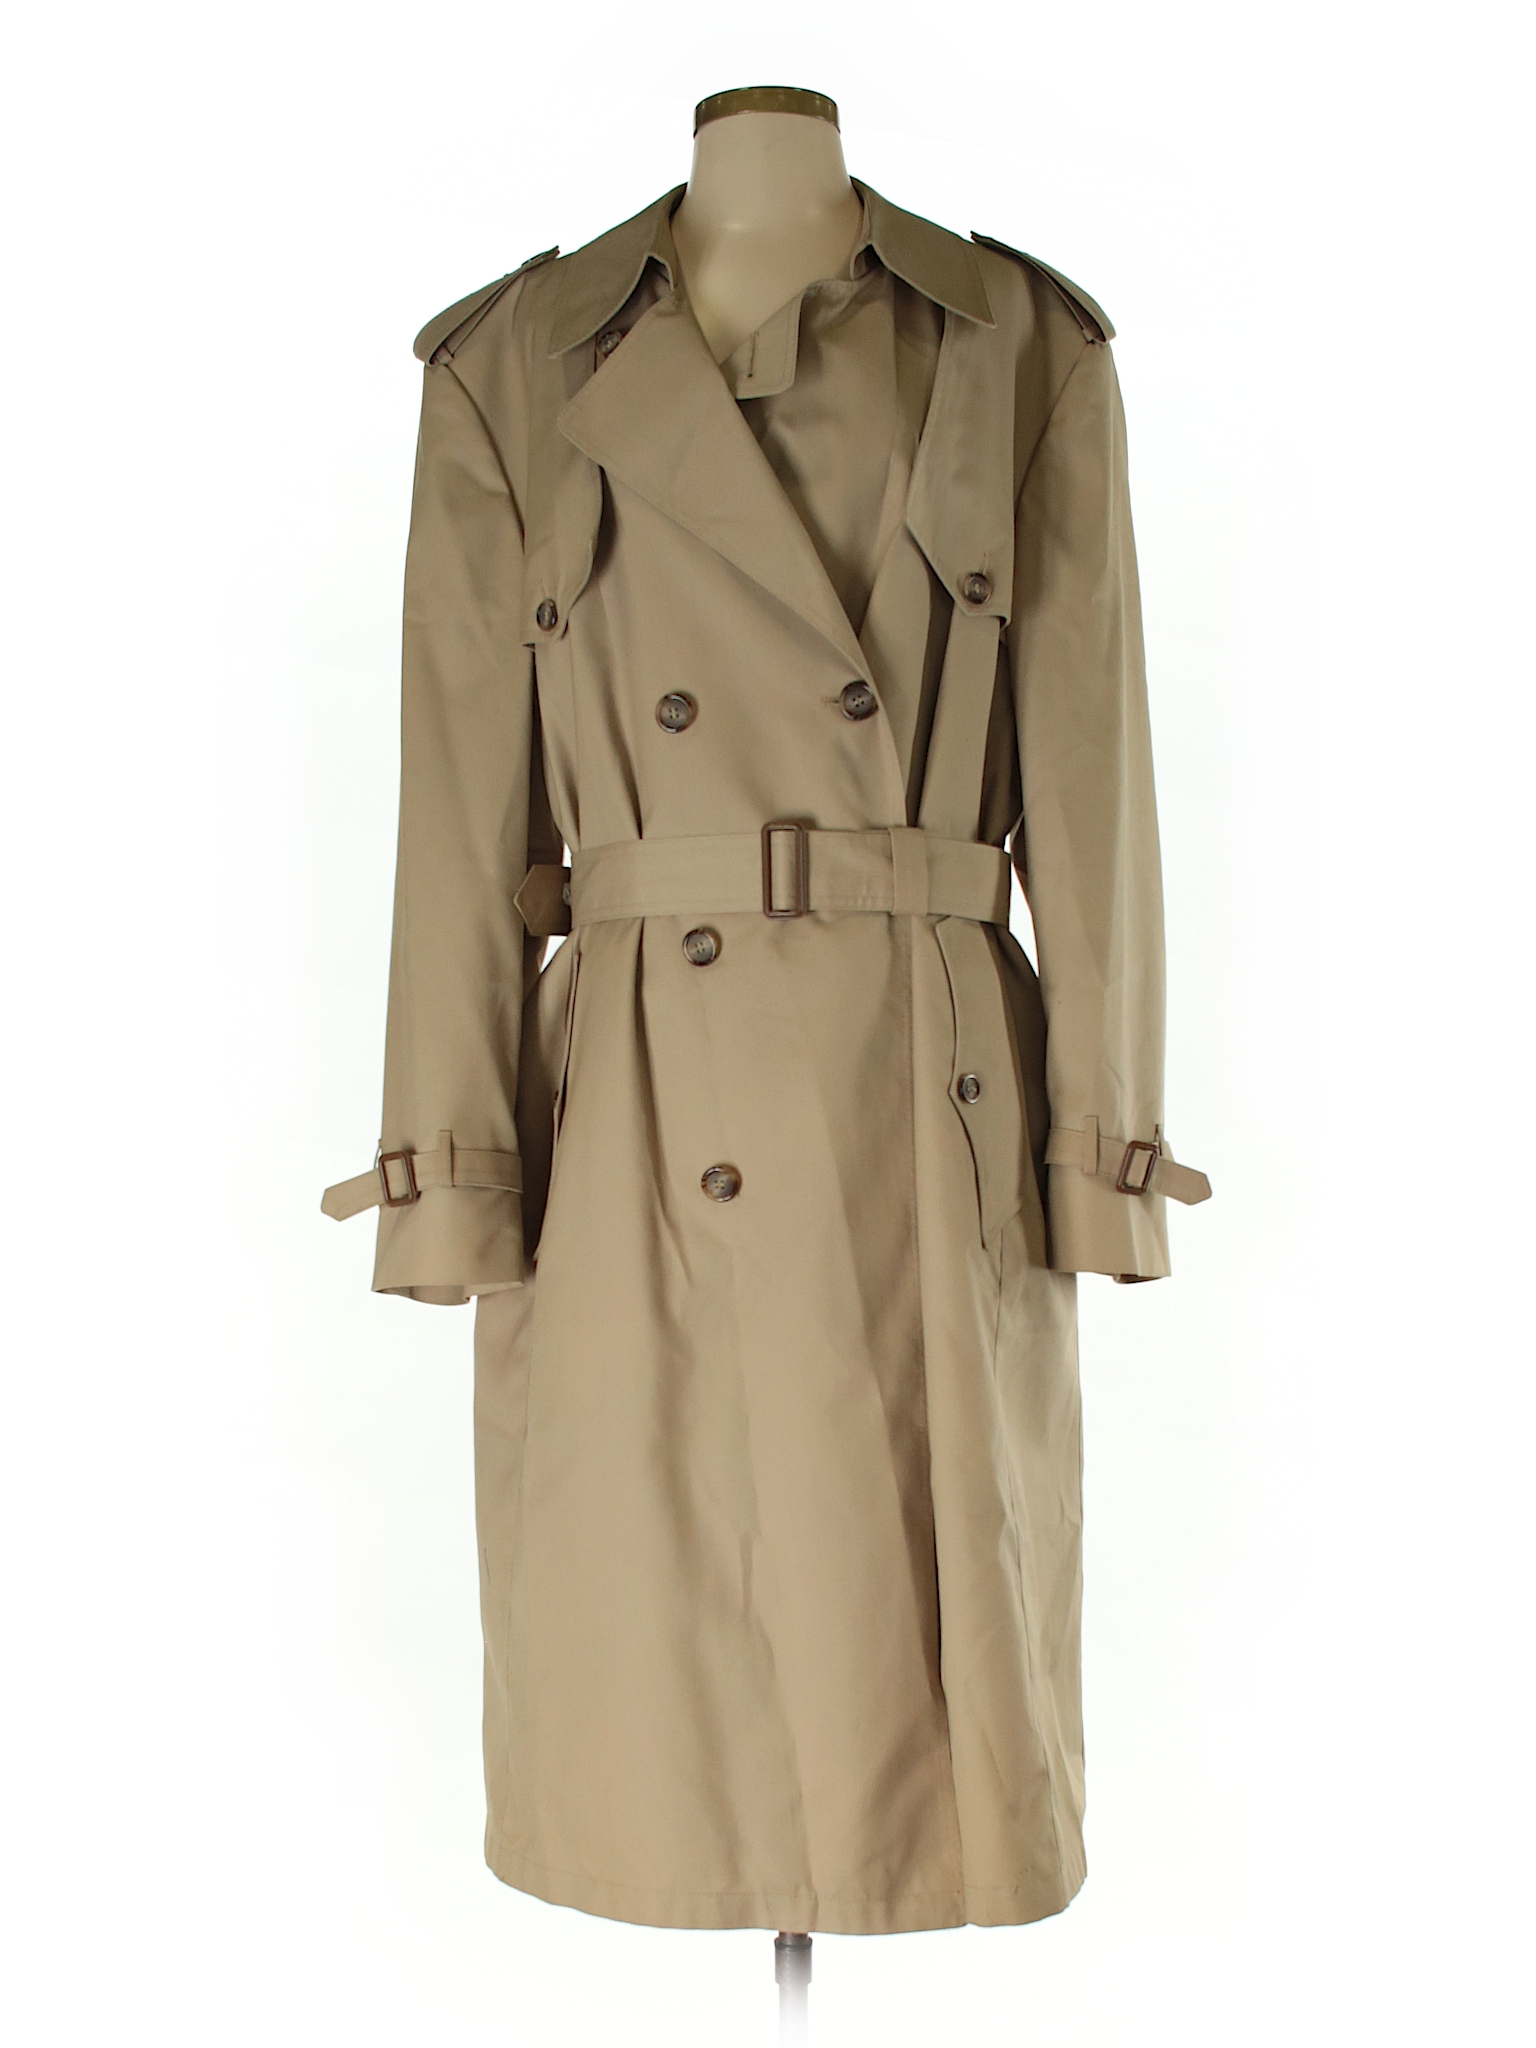 Christian Dior Solid Tan Trenchcoat Size 44 (IT) - 81% off | thredUP